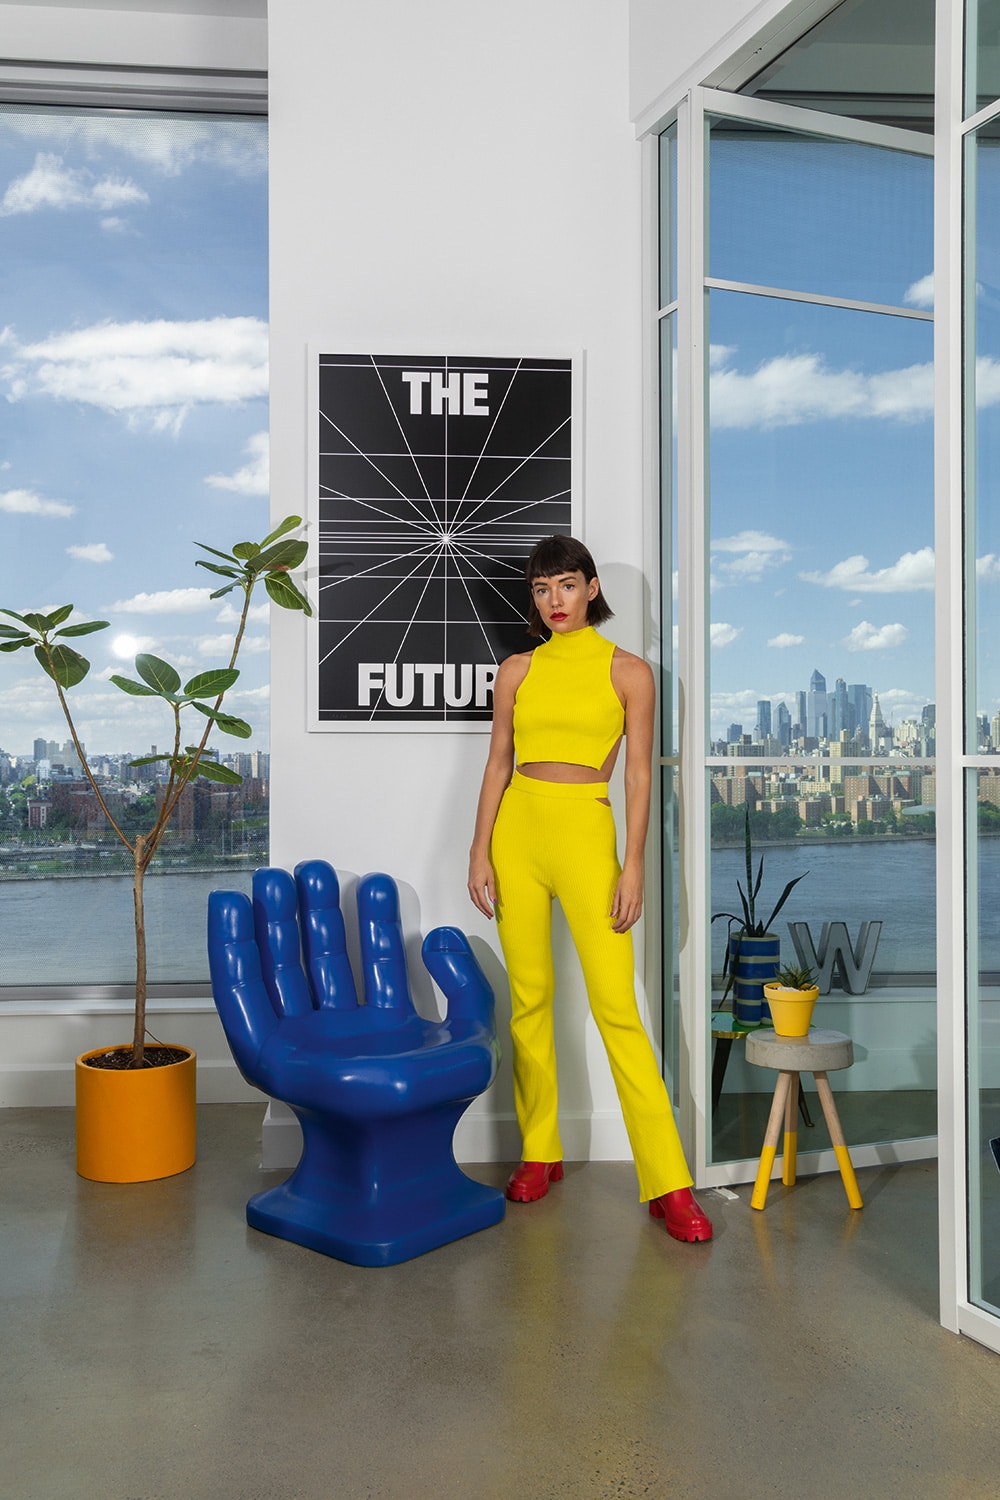 Portrait of Jessica Walsh in the studio next to a giant blue hand chair